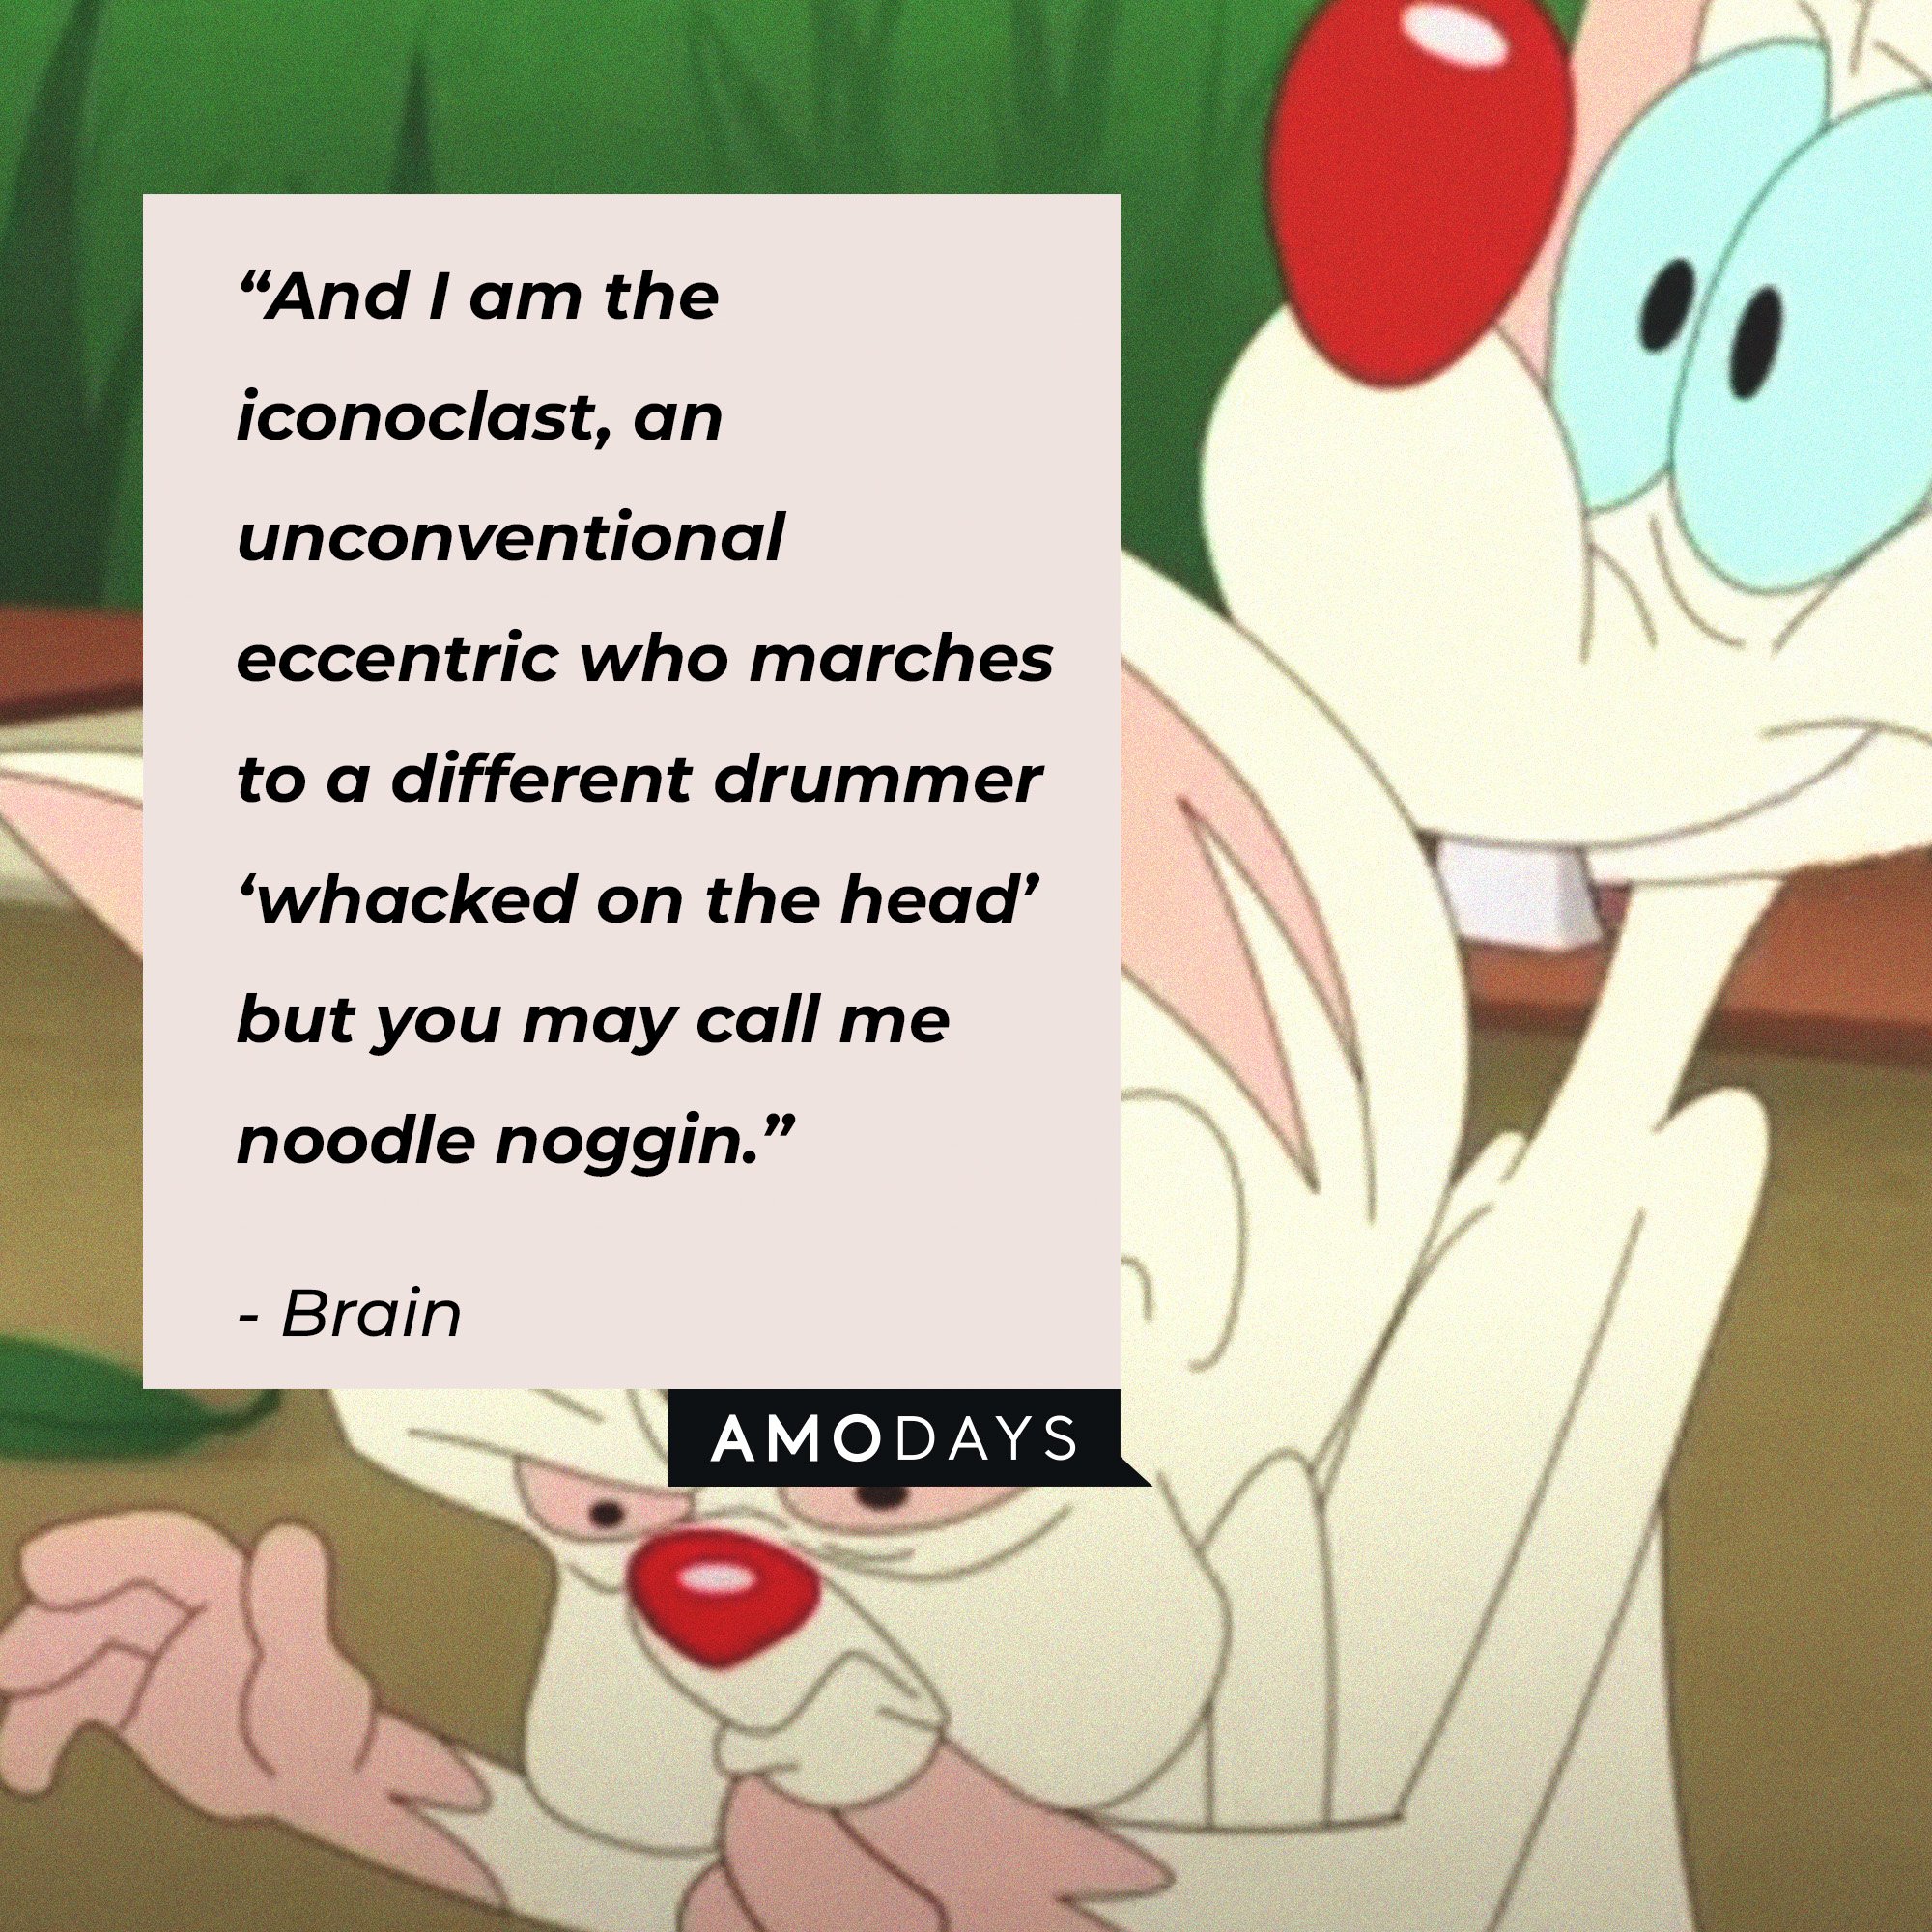 Brain's quote: “And I am the iconoclast, an unconventional eccentric who marches to a different drummer ‘whacked on the head’ but you may call me noodle noggin.” | Image: AmoDays